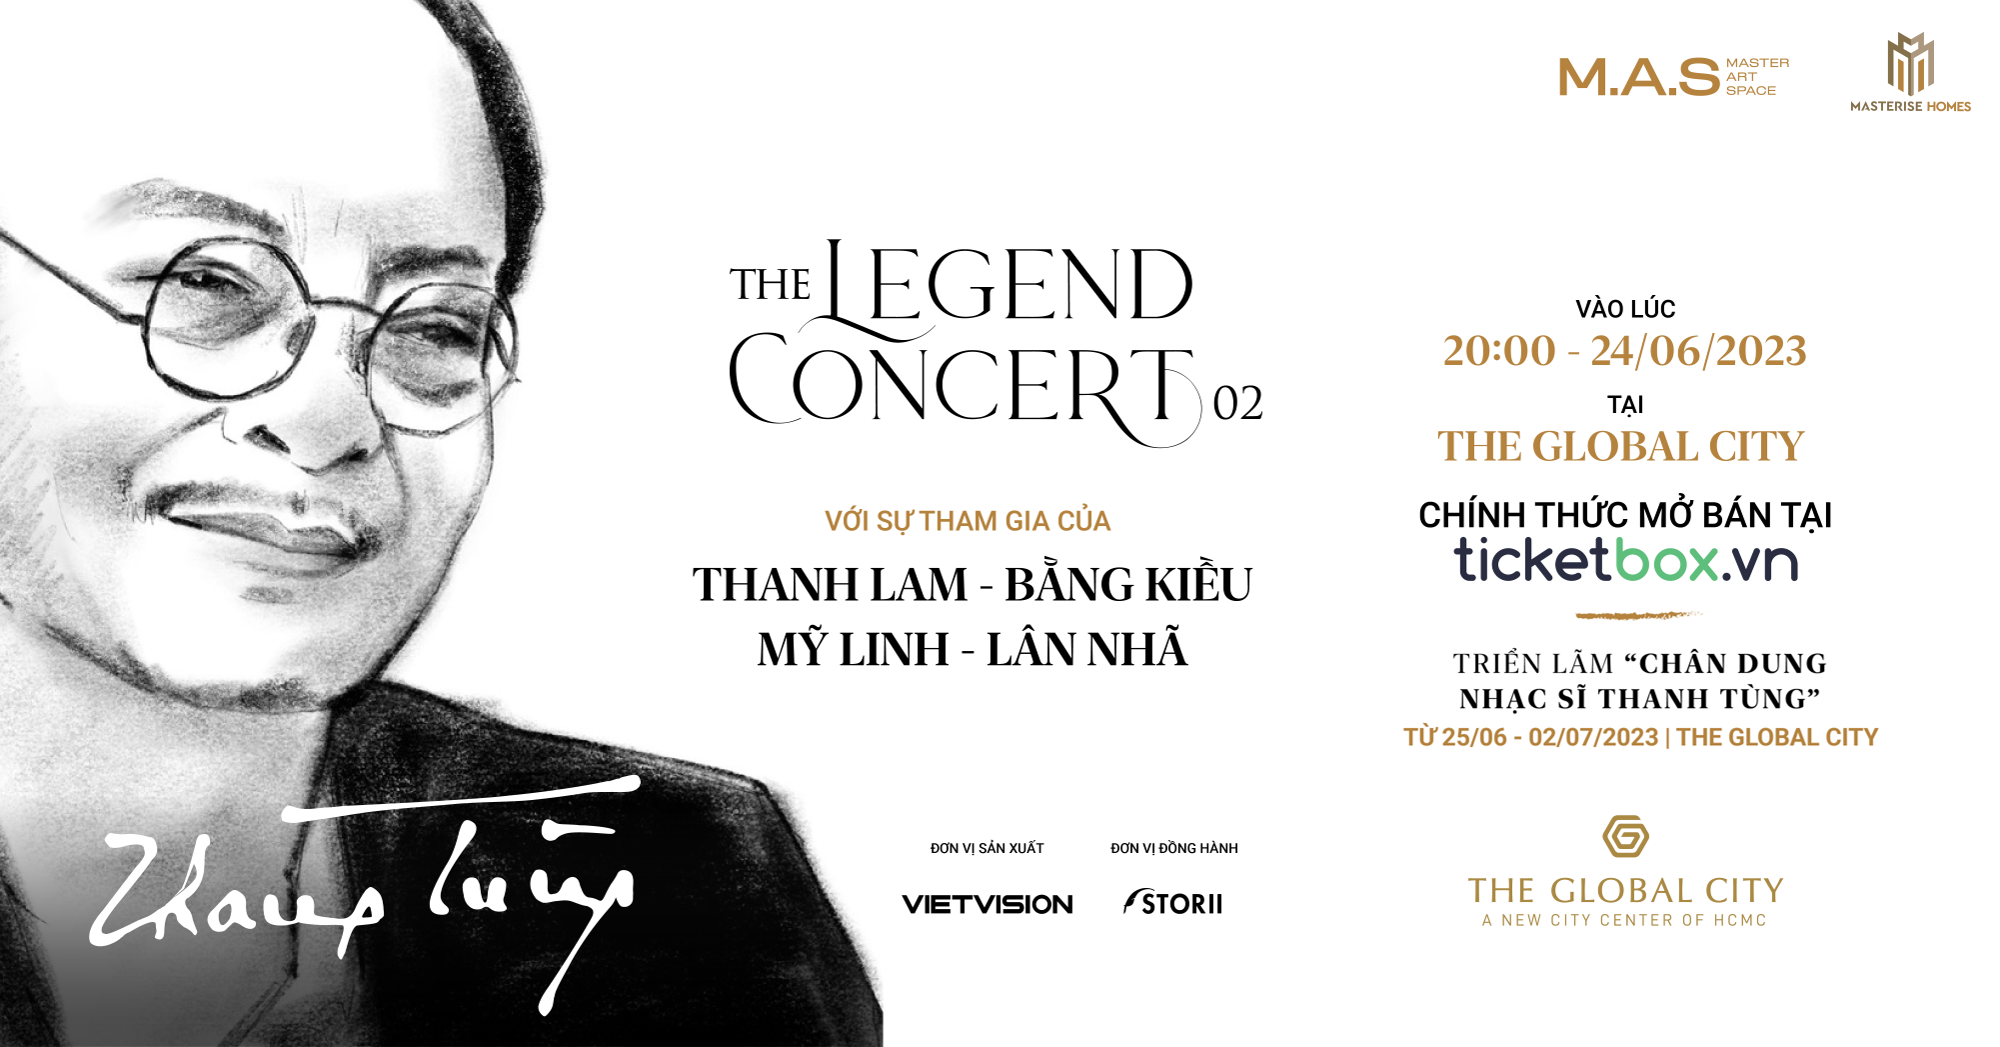 the-legend-concert-02-nhac-si-thanh-tung-1686021253.png